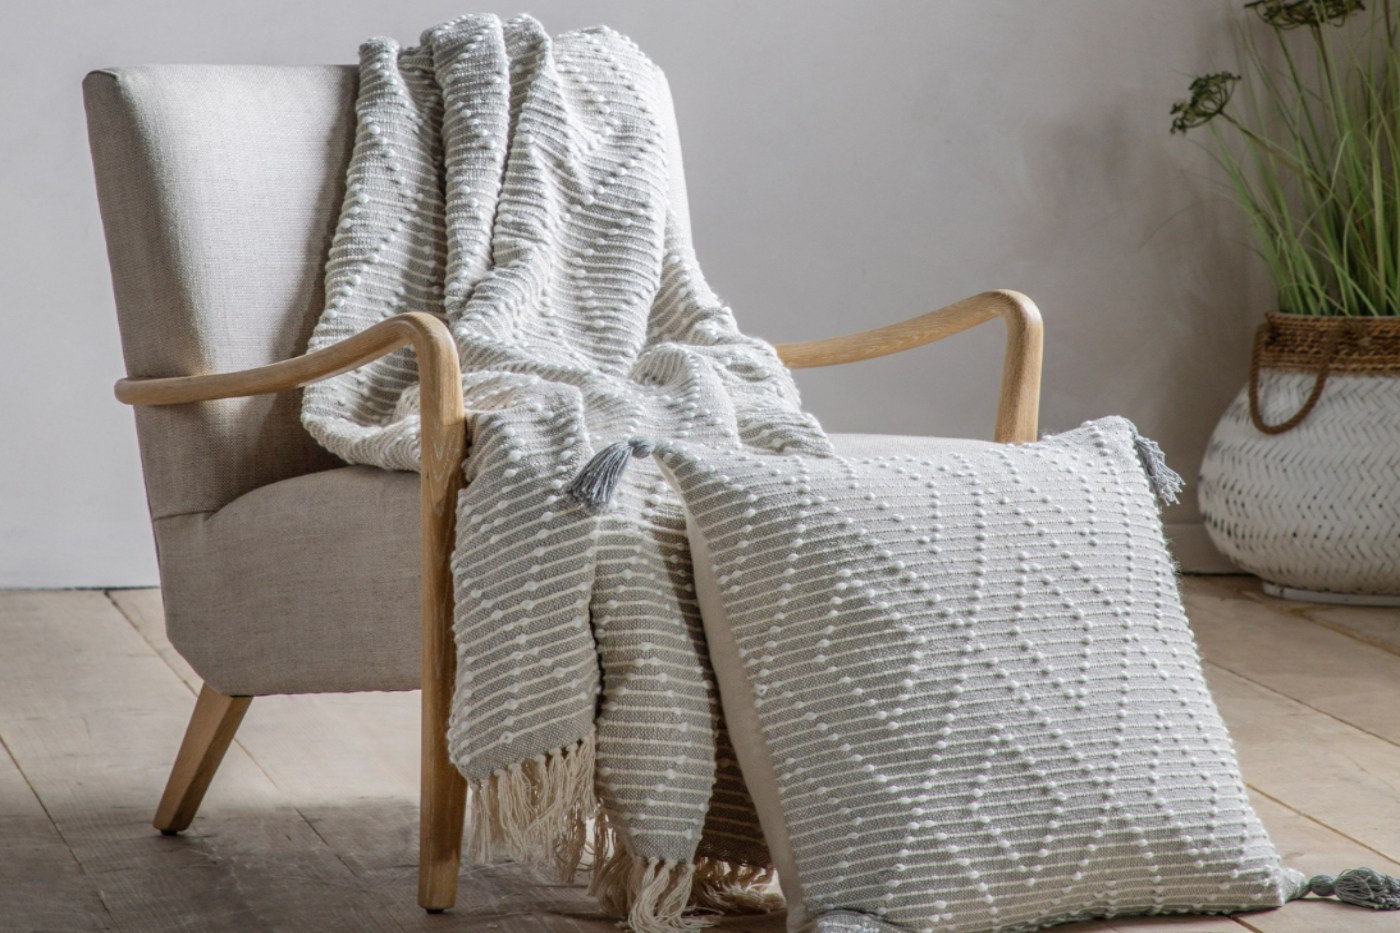 View Light Grey Woven Diamond Throw With Tassels 1300 x 1700mm Ideral Bed Or Sofa Throw Gives additional Warmth In Colder Evenings information